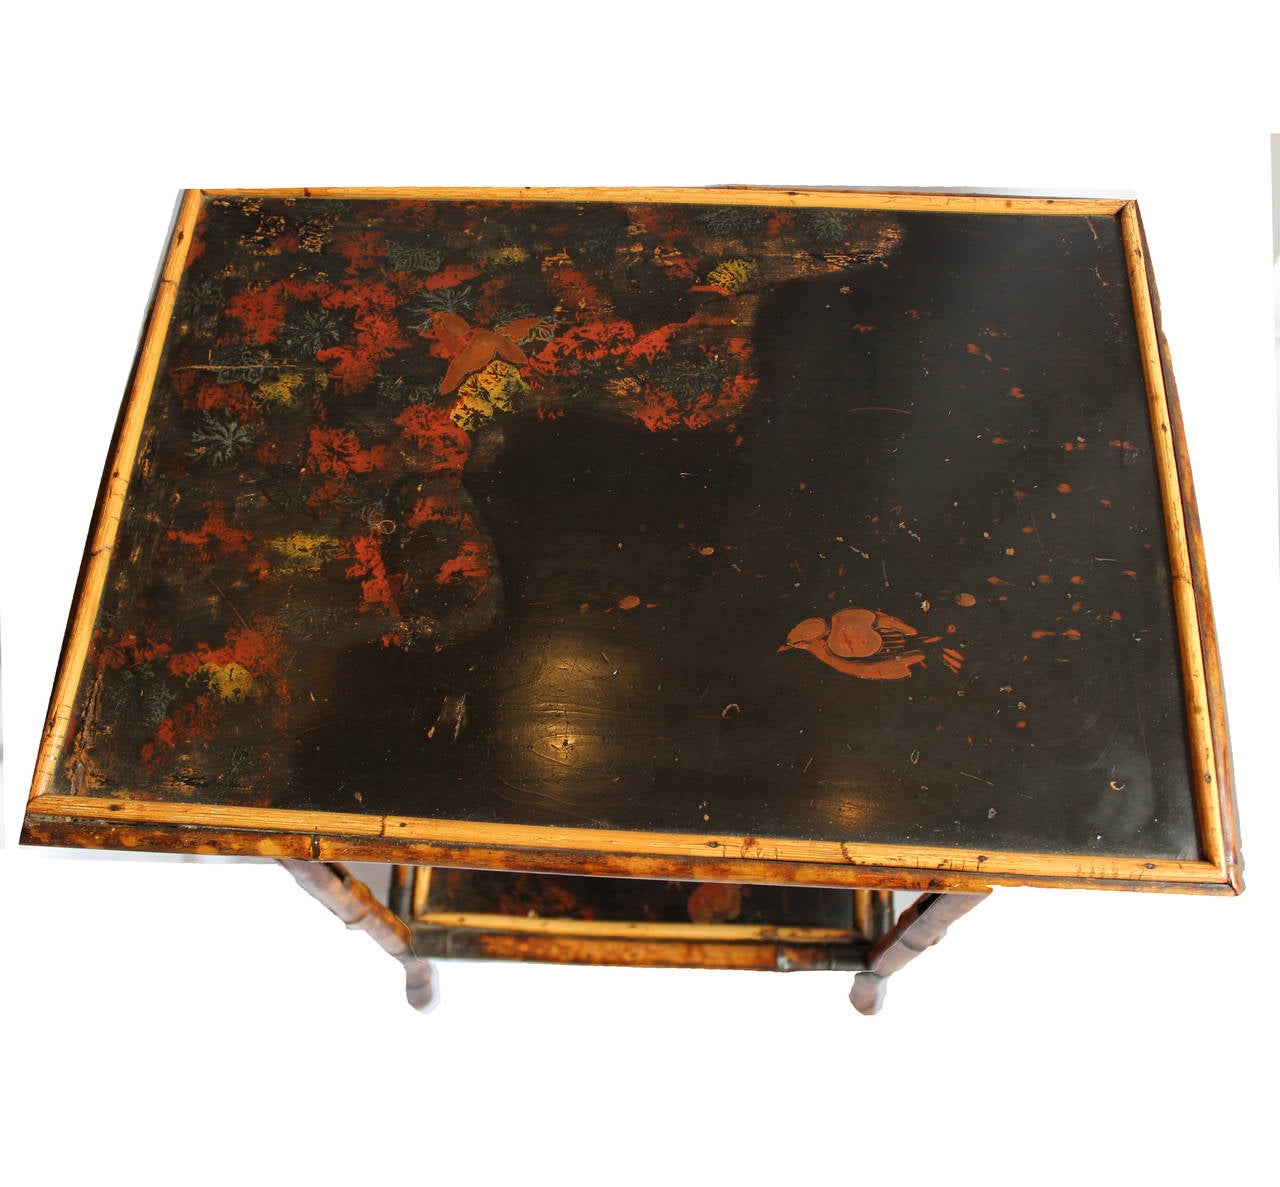 Bamboo side table that can be used as a tea cart, occasional table, or drinks table, depicts flora and fauna in painted scene on top and base.  Late 19th century, England.